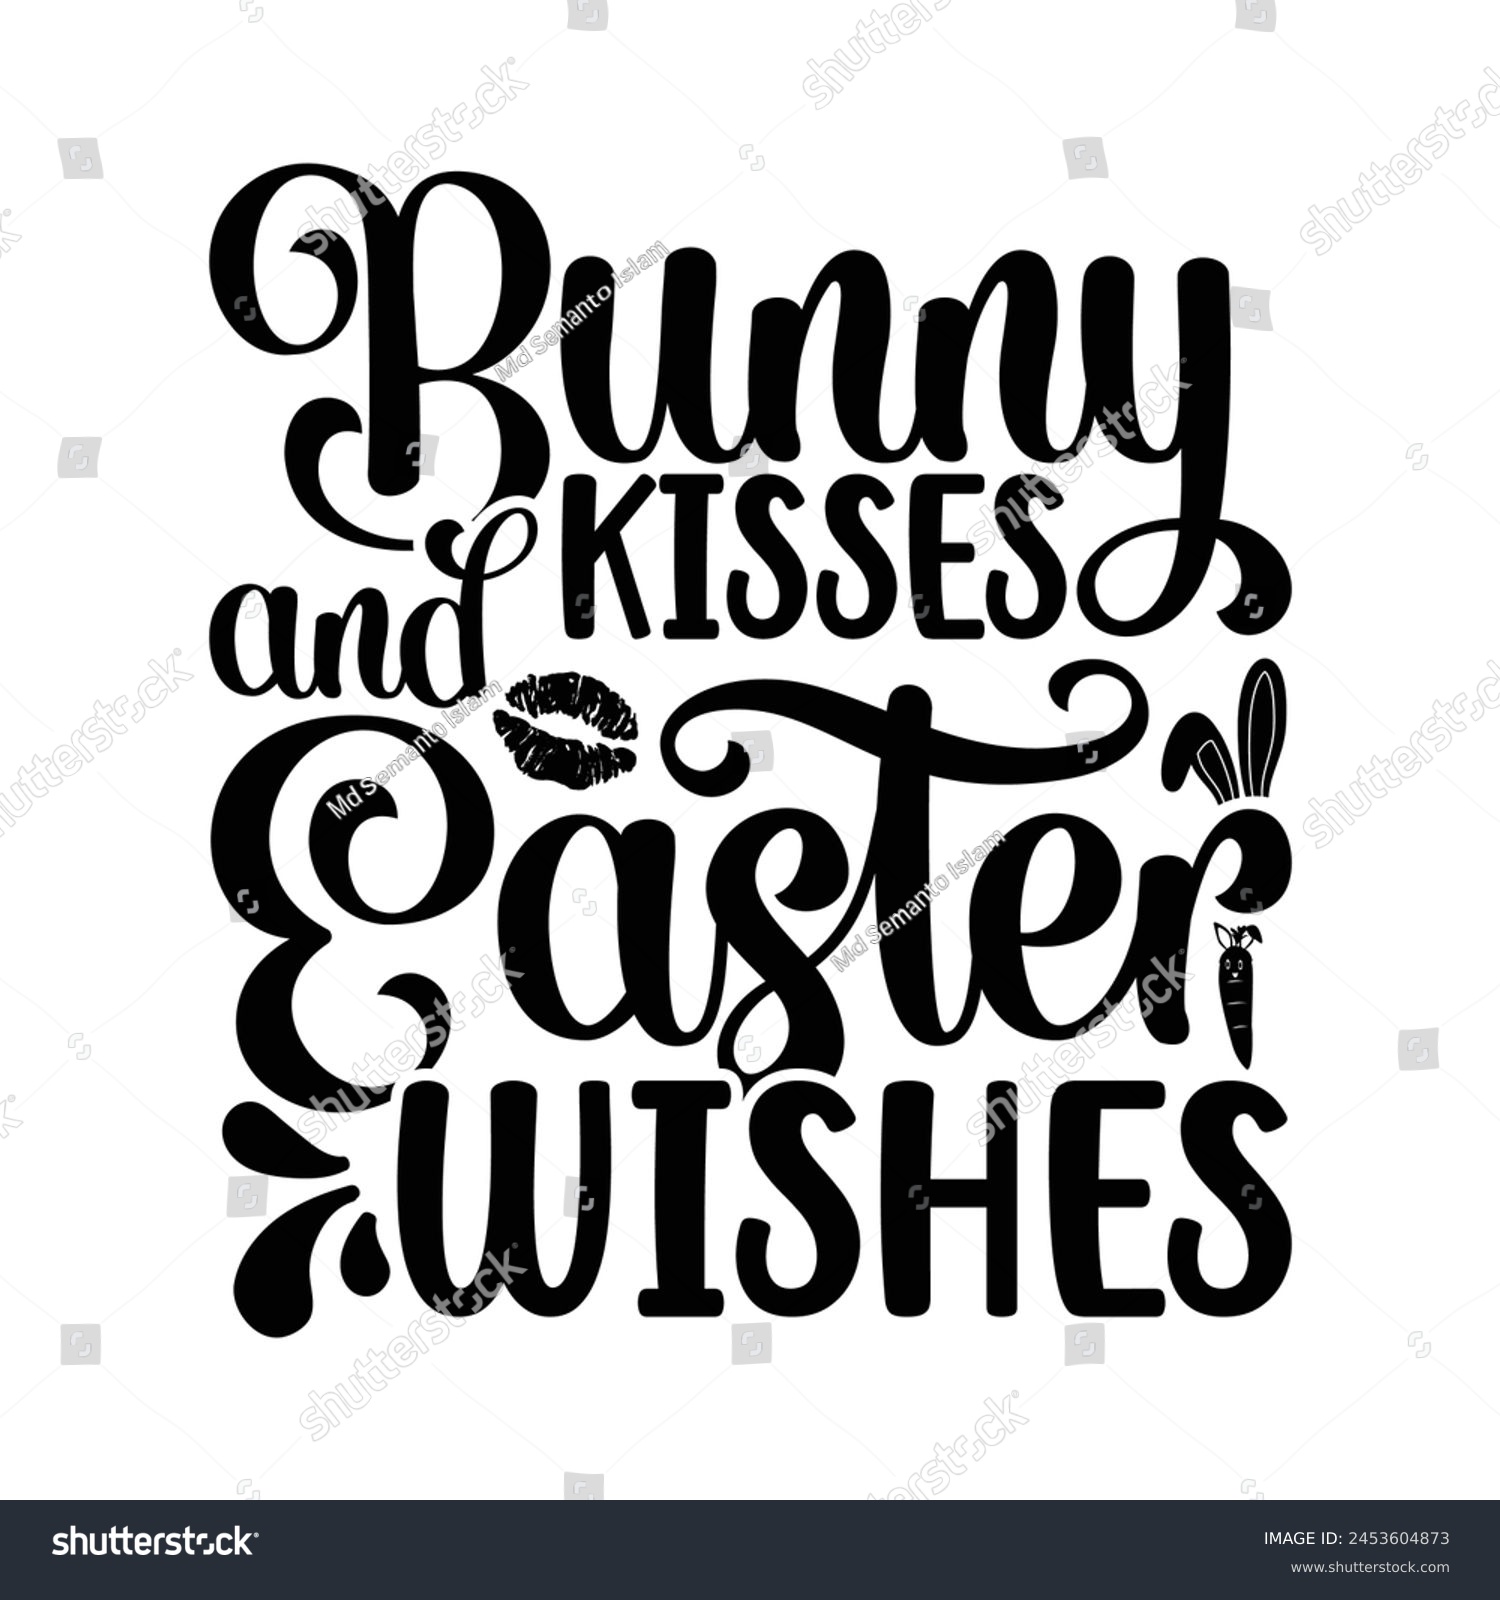 SVG of Bunny kisses and easter wishes svg